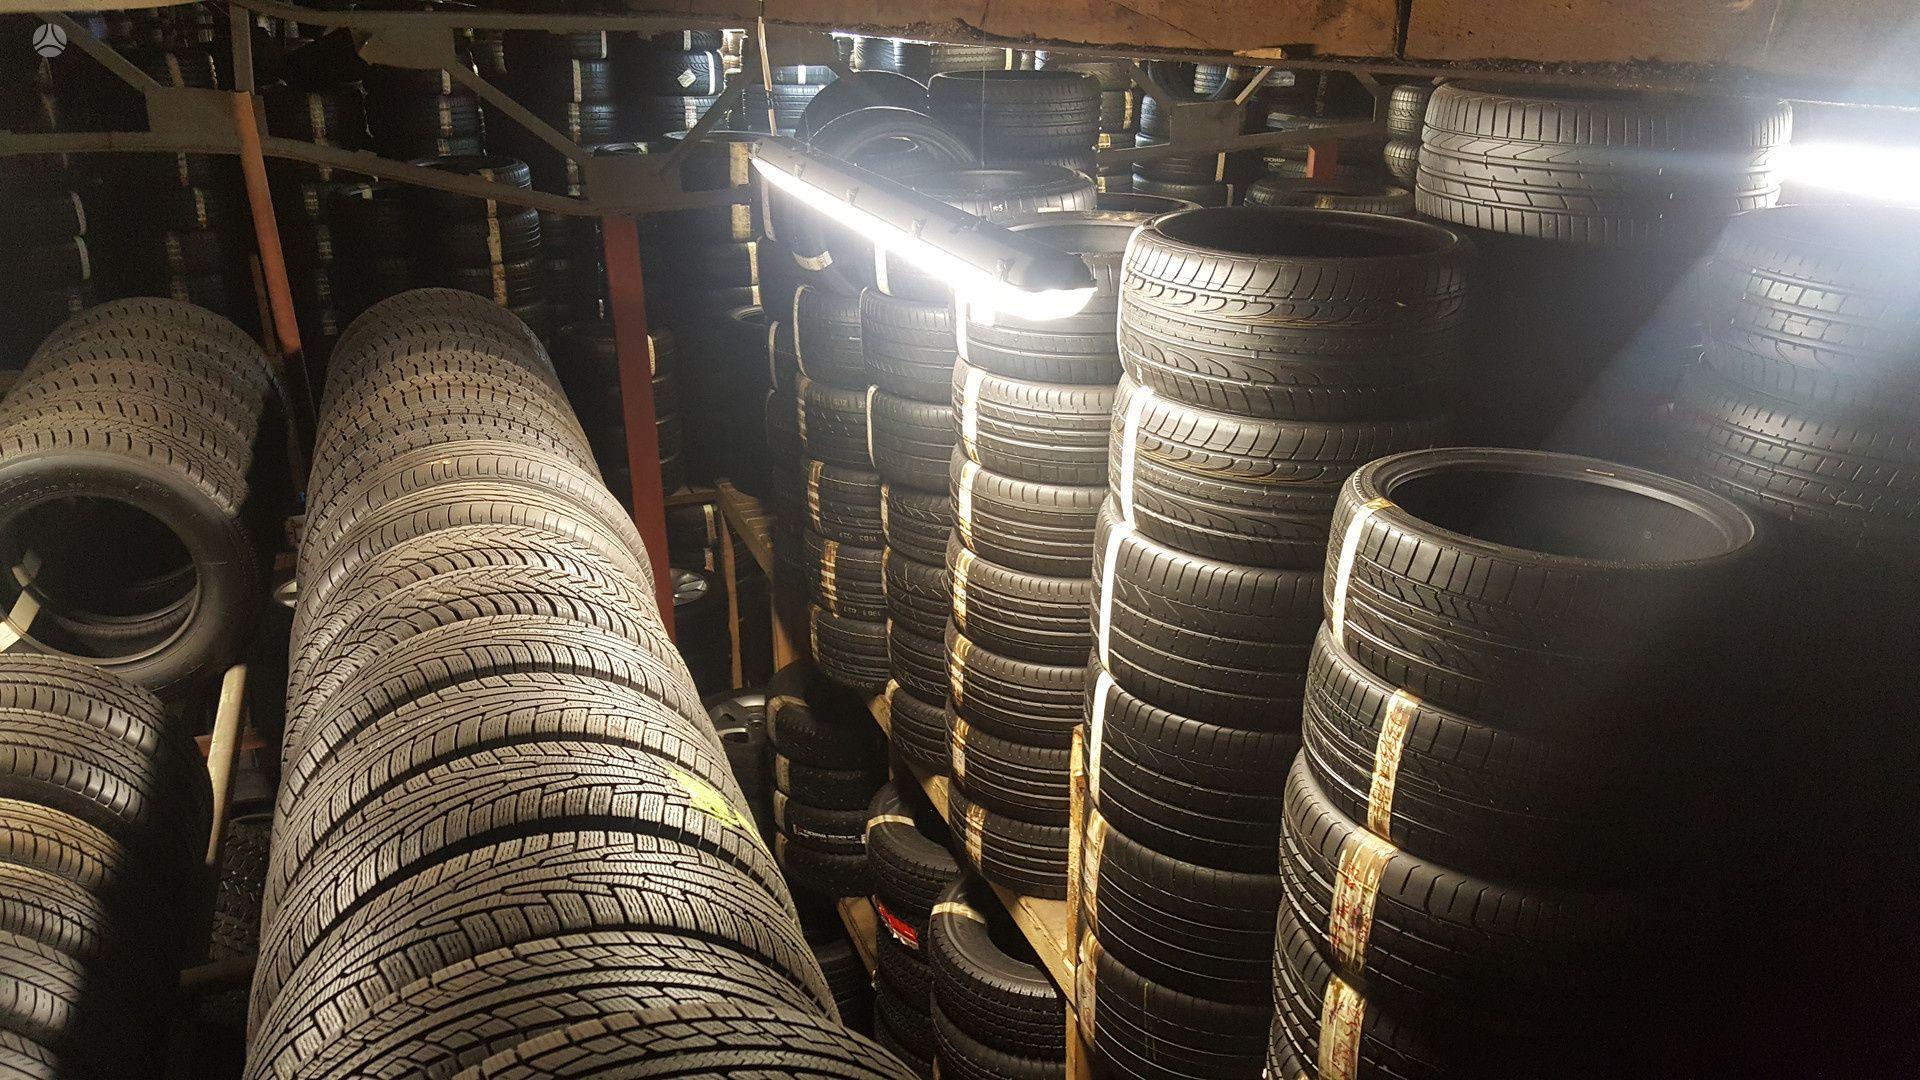 Tires, Tyres, Dunlop, Auto Tires, Picture Of Tires